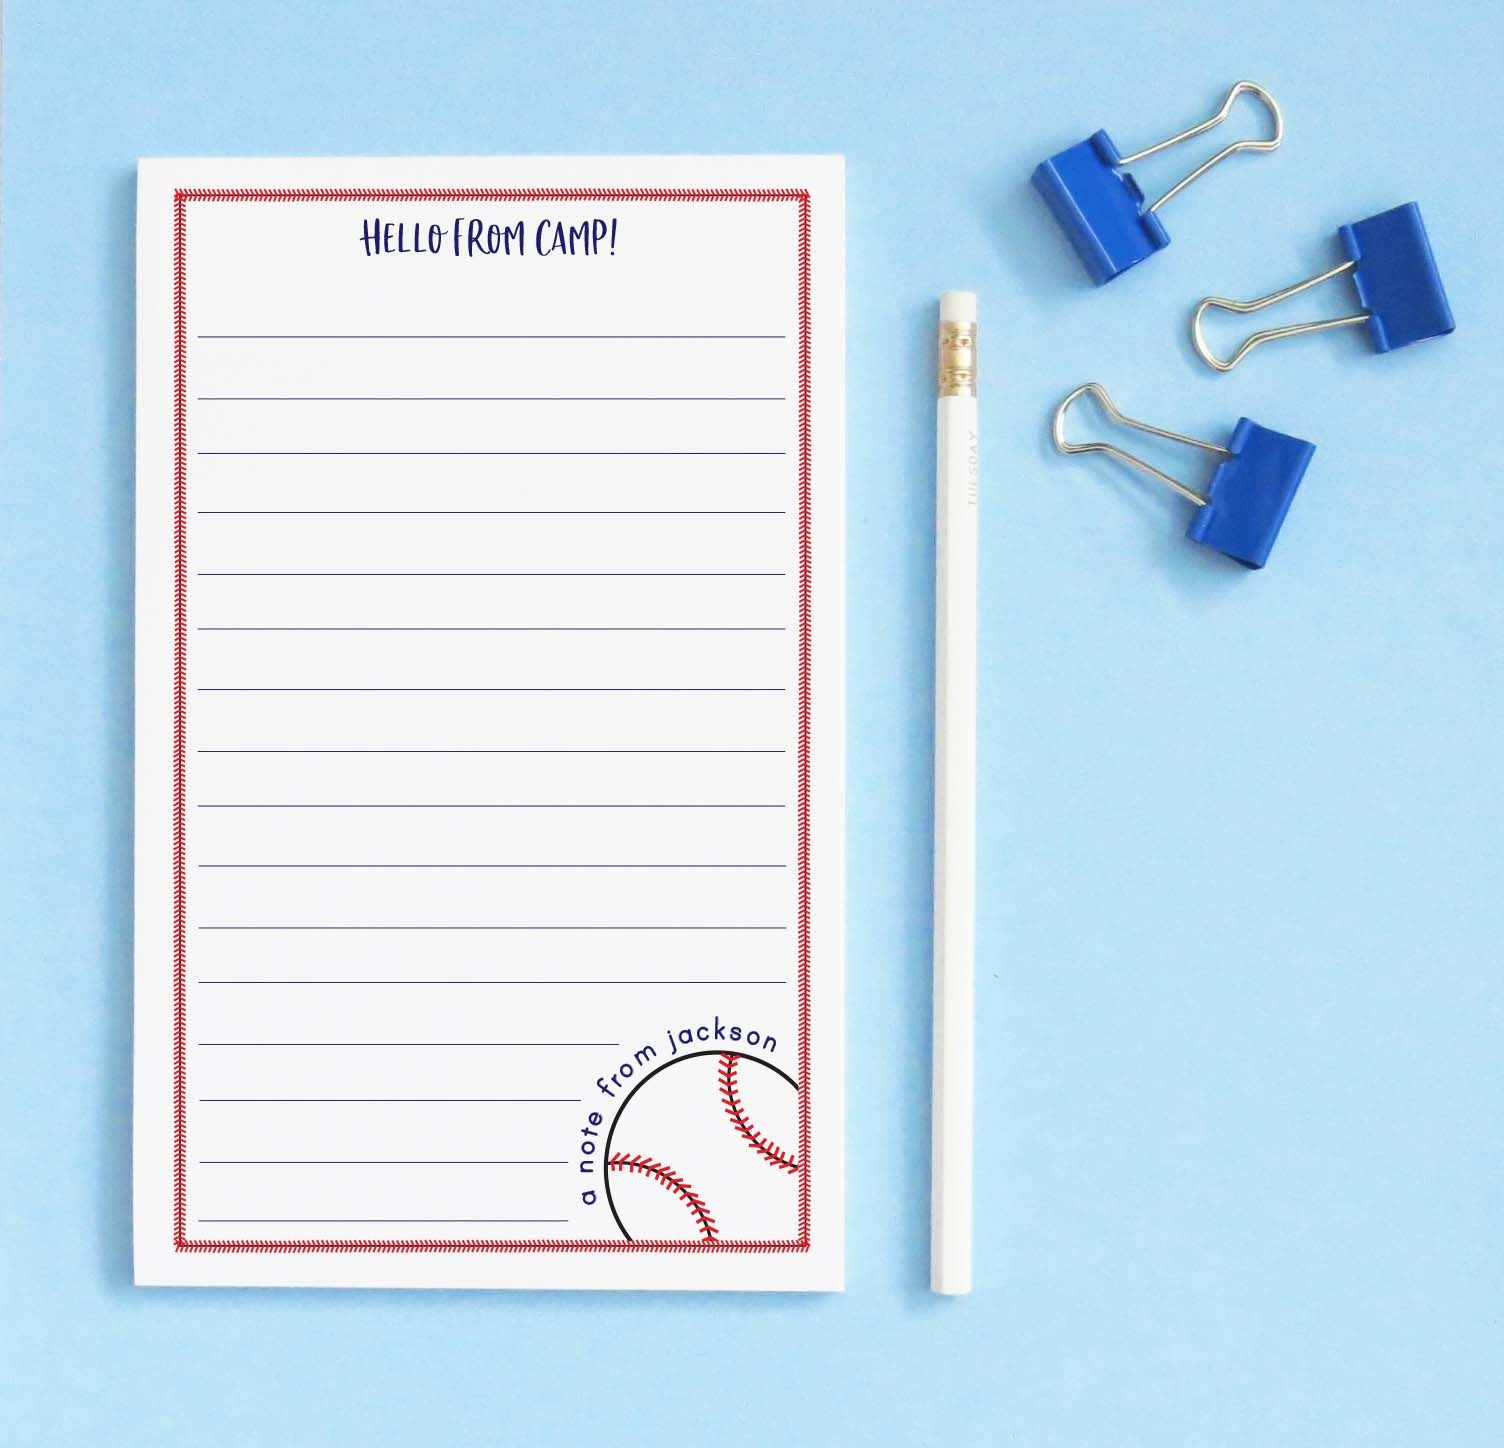 NP275 Personalized Baseball Camp Notepads For Boys sports kids boy